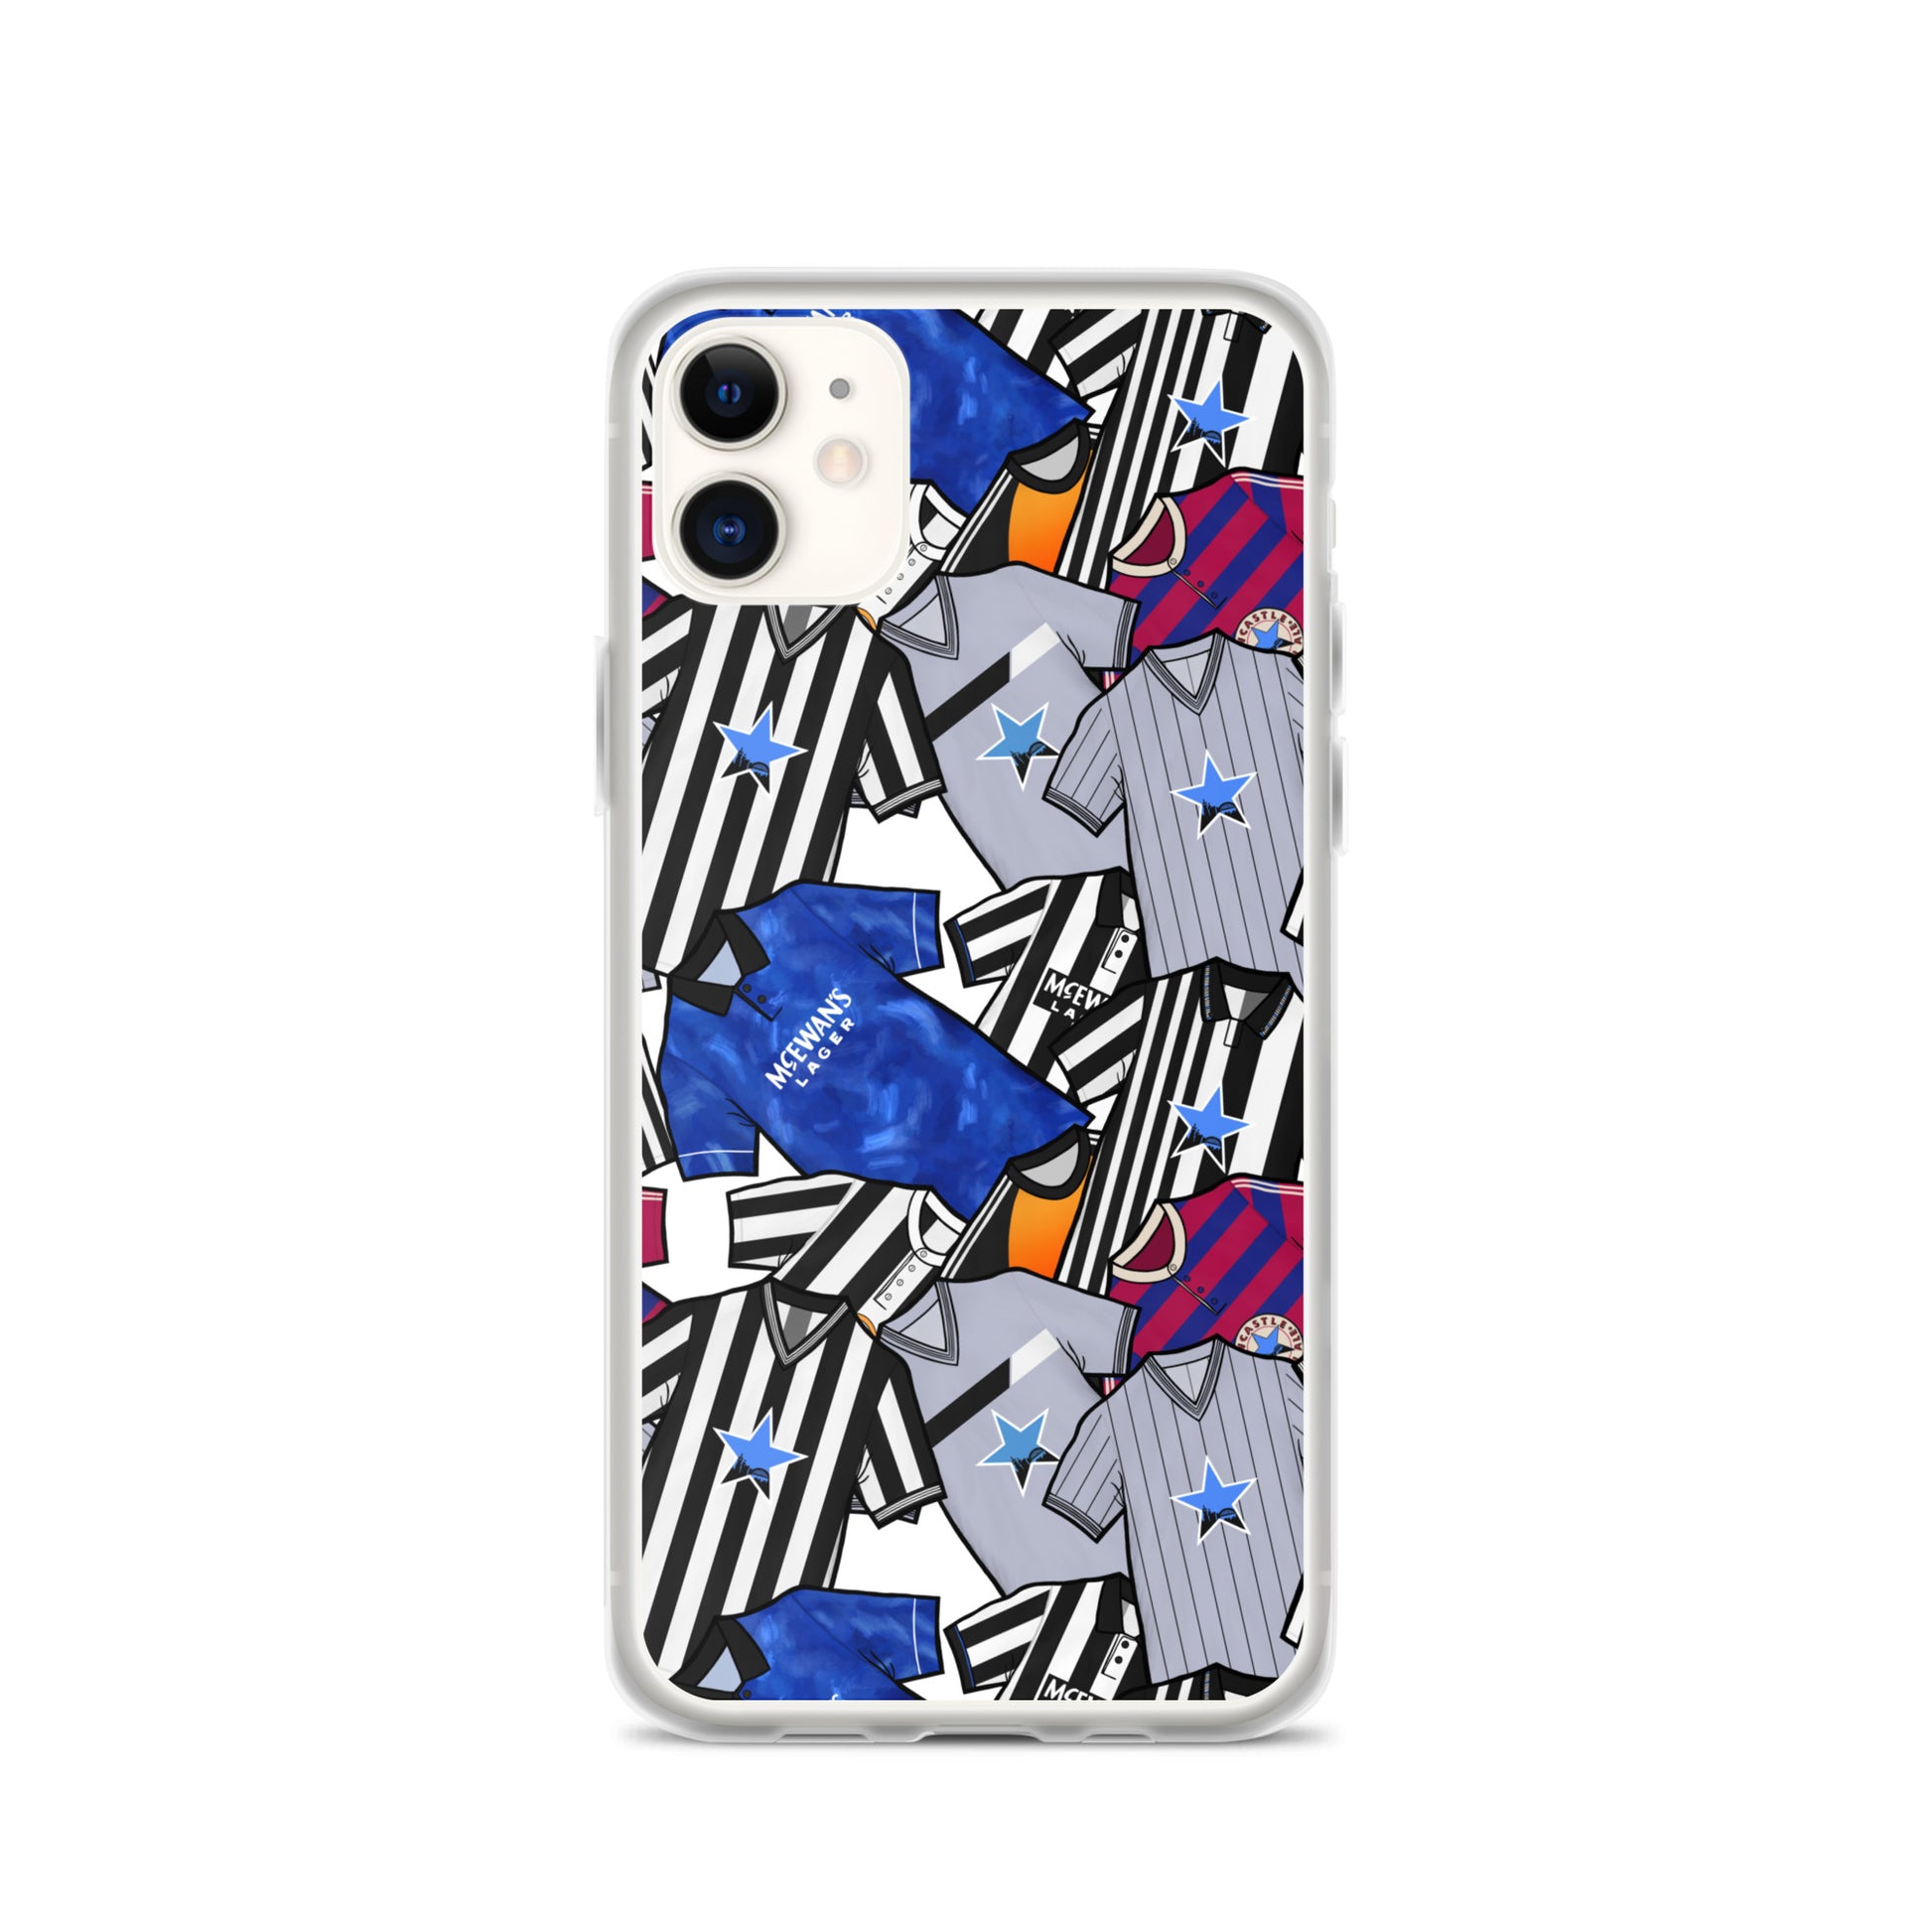 Phone case for iPhone 11 inspired by the Retro shirts of Newcastle United!